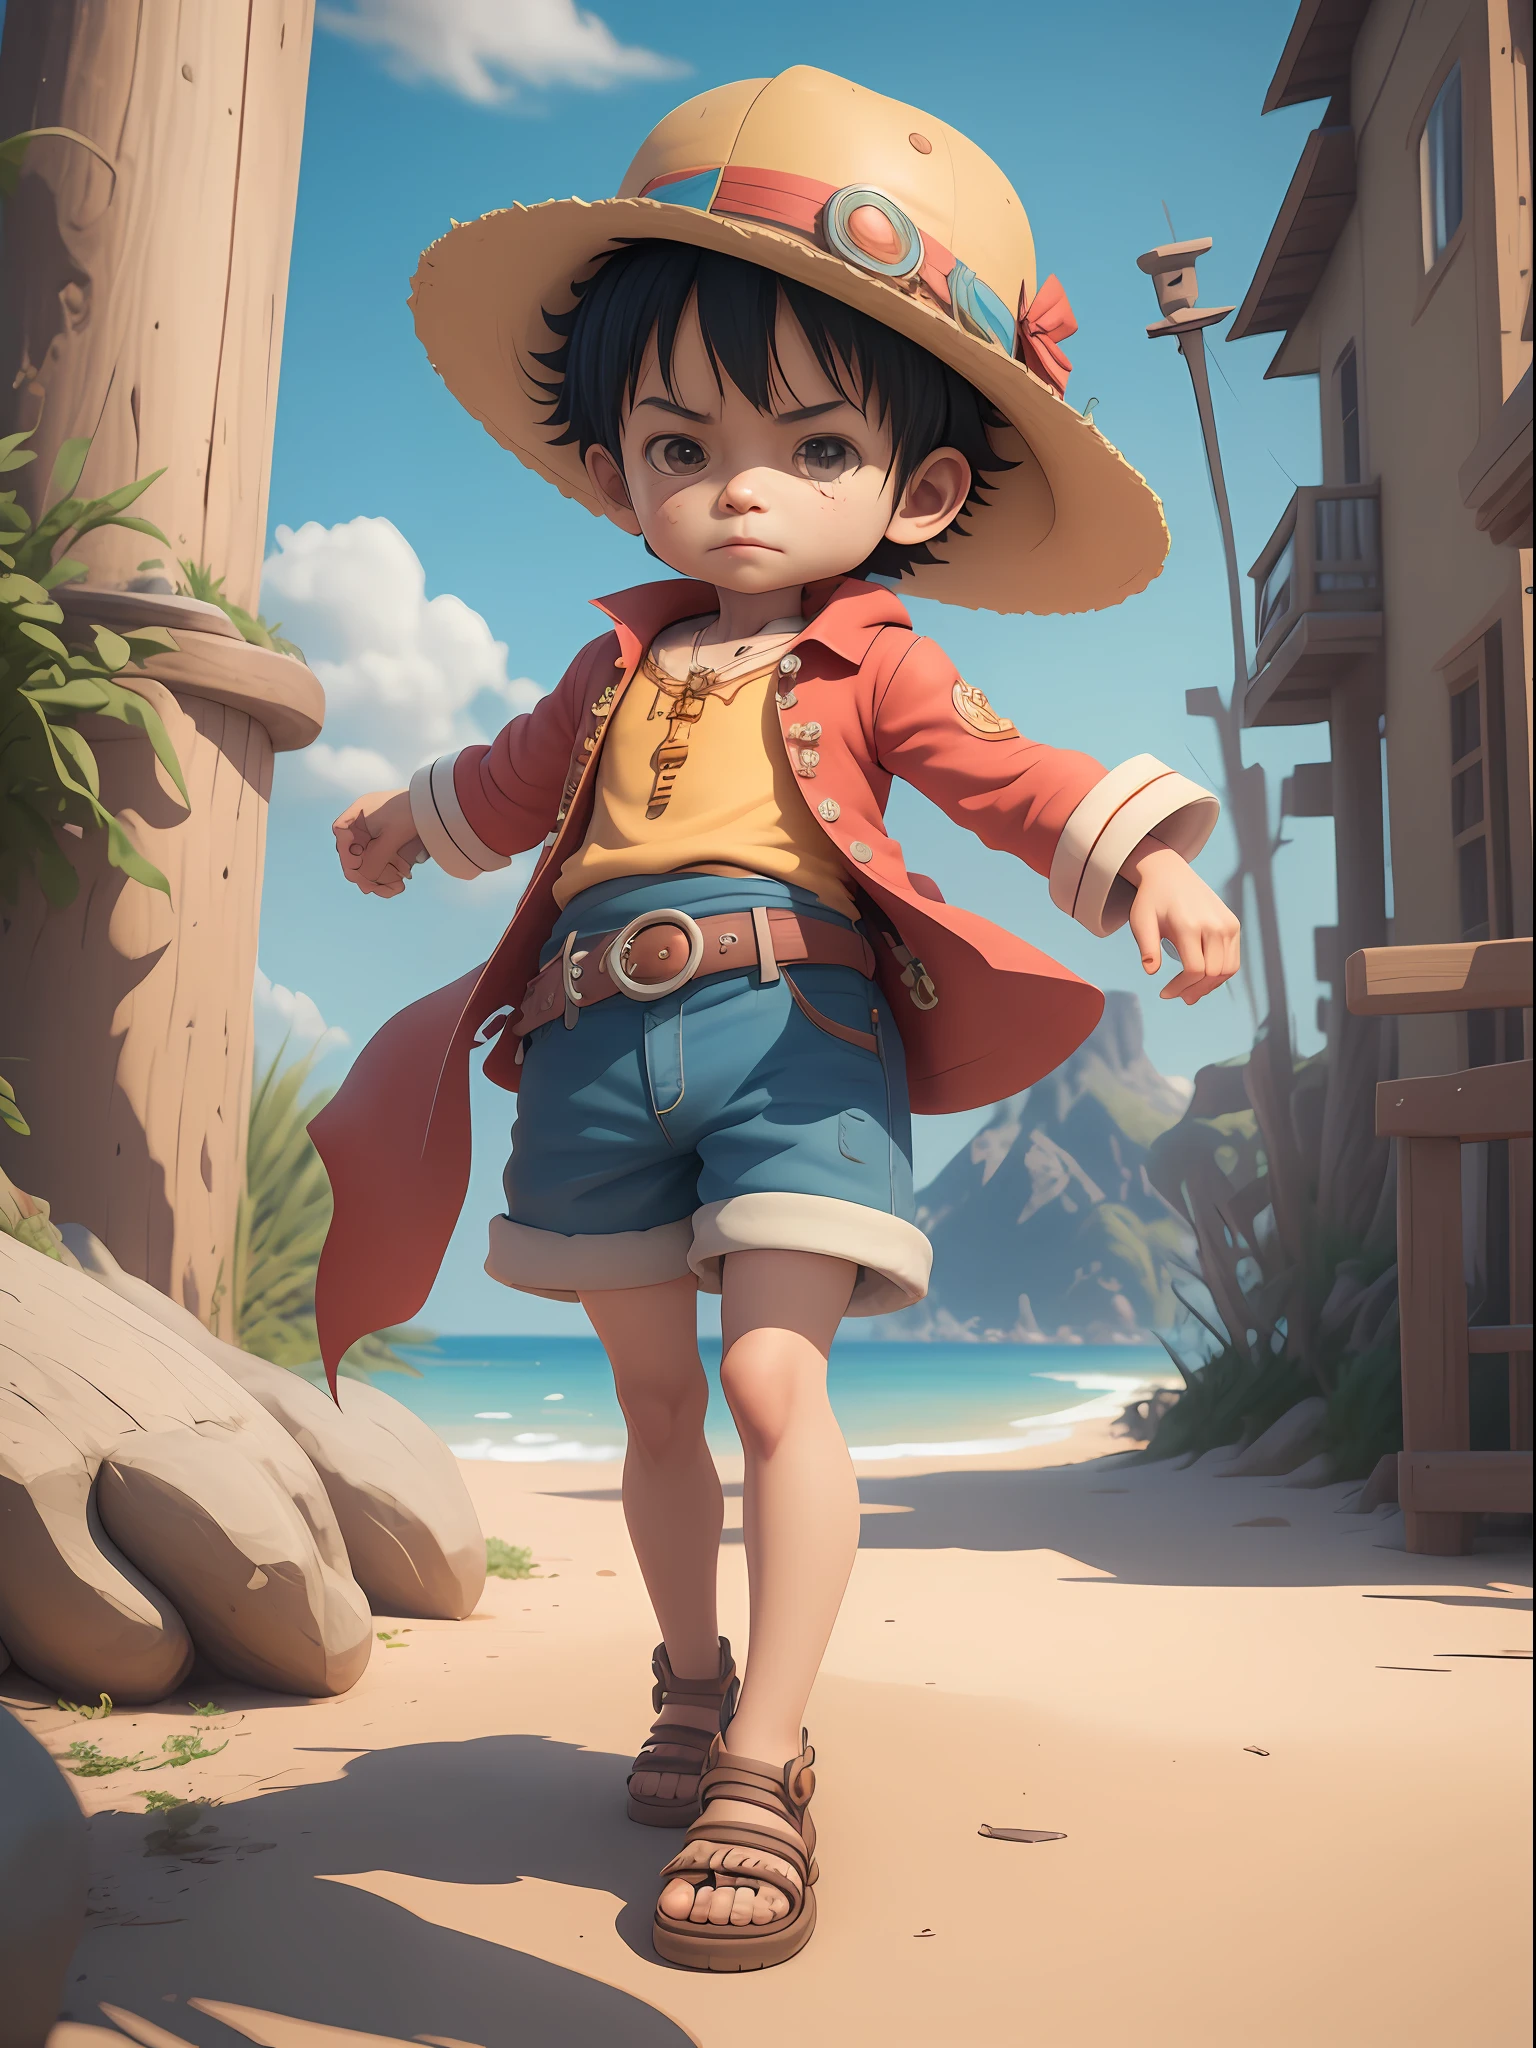 1boy, solo, cute 3d render, cute detailed digital art, male explorer mini cute boy, cute digital painting, stylized 3d render, cute digital art, cute render 3d anime boy, luffy the little pirate looks up, cute! c4d, portrait anime sea pirate boy, he is wearing an open long-sleeved red cardigan with four buttons, with a red sash tied around his waist, blue shorts with cuffs, sandals, background beach, ship